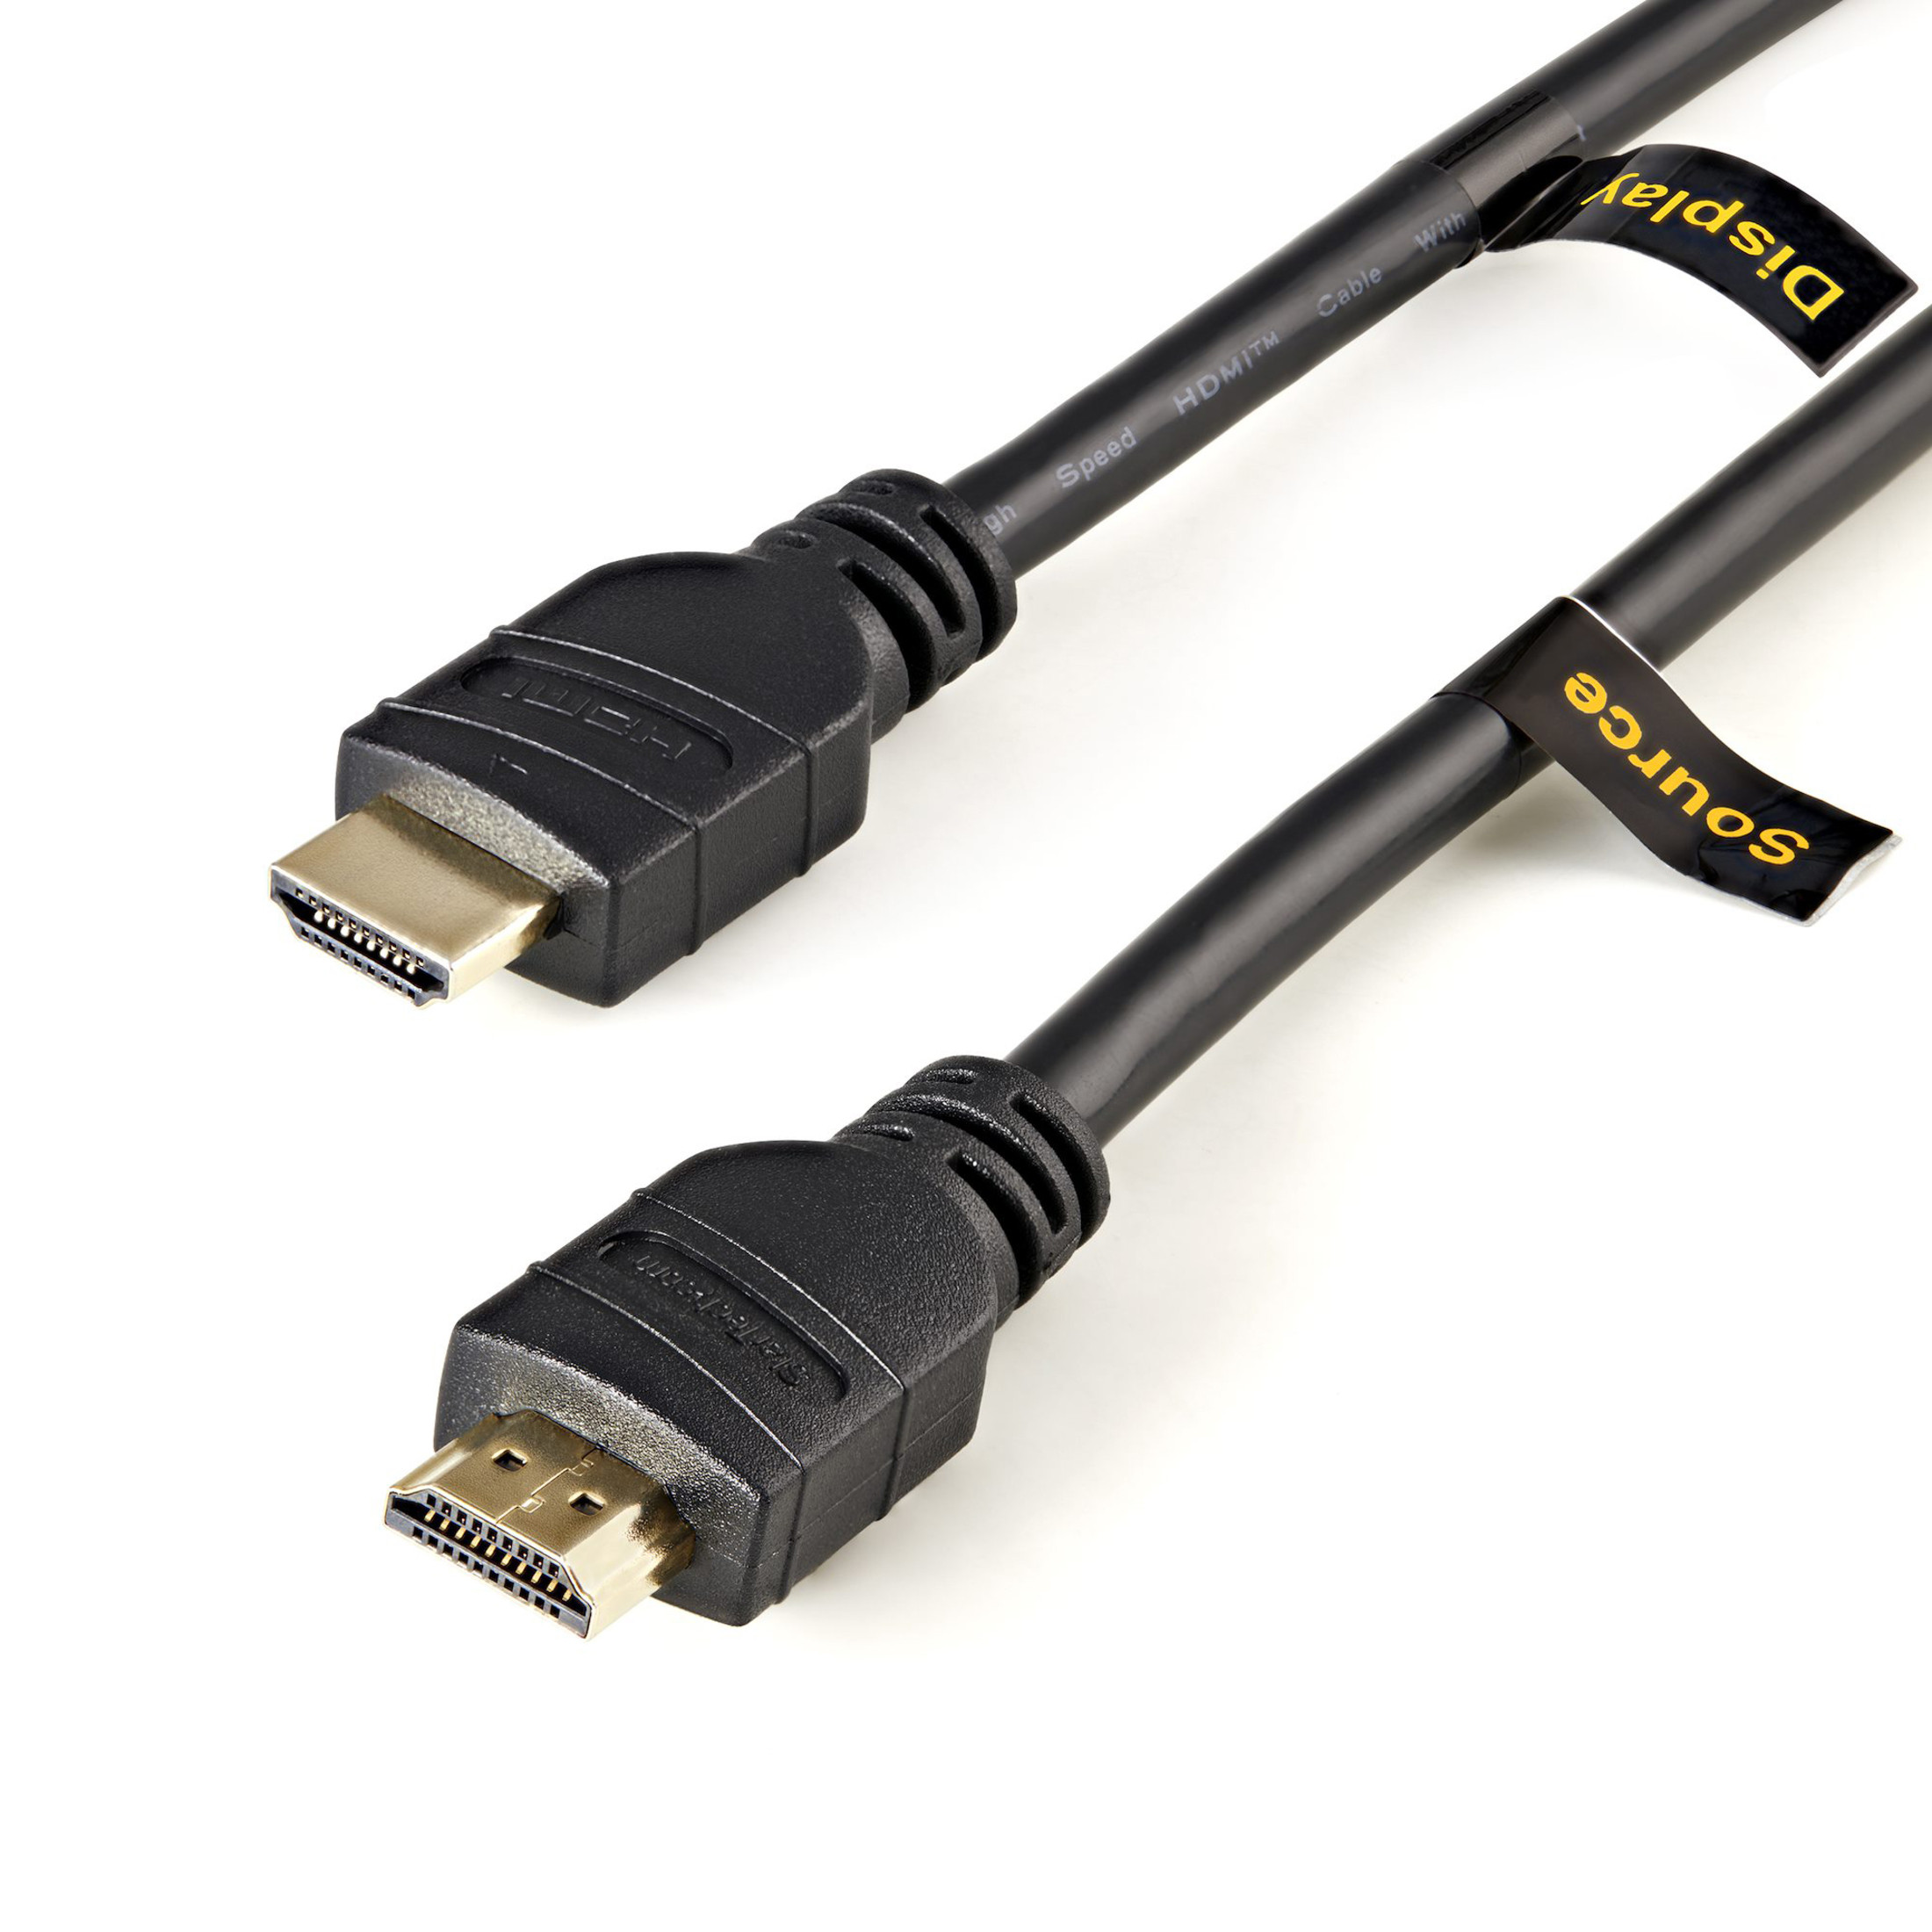 .com 33ft (10m) Active 4K 30Hz UHD High Speed HDMI 1.4 Cable Ethernet, CL2 Rated HDMI Cord for In-Wall Install32.8f... HDMM10MA - Corporate Armor